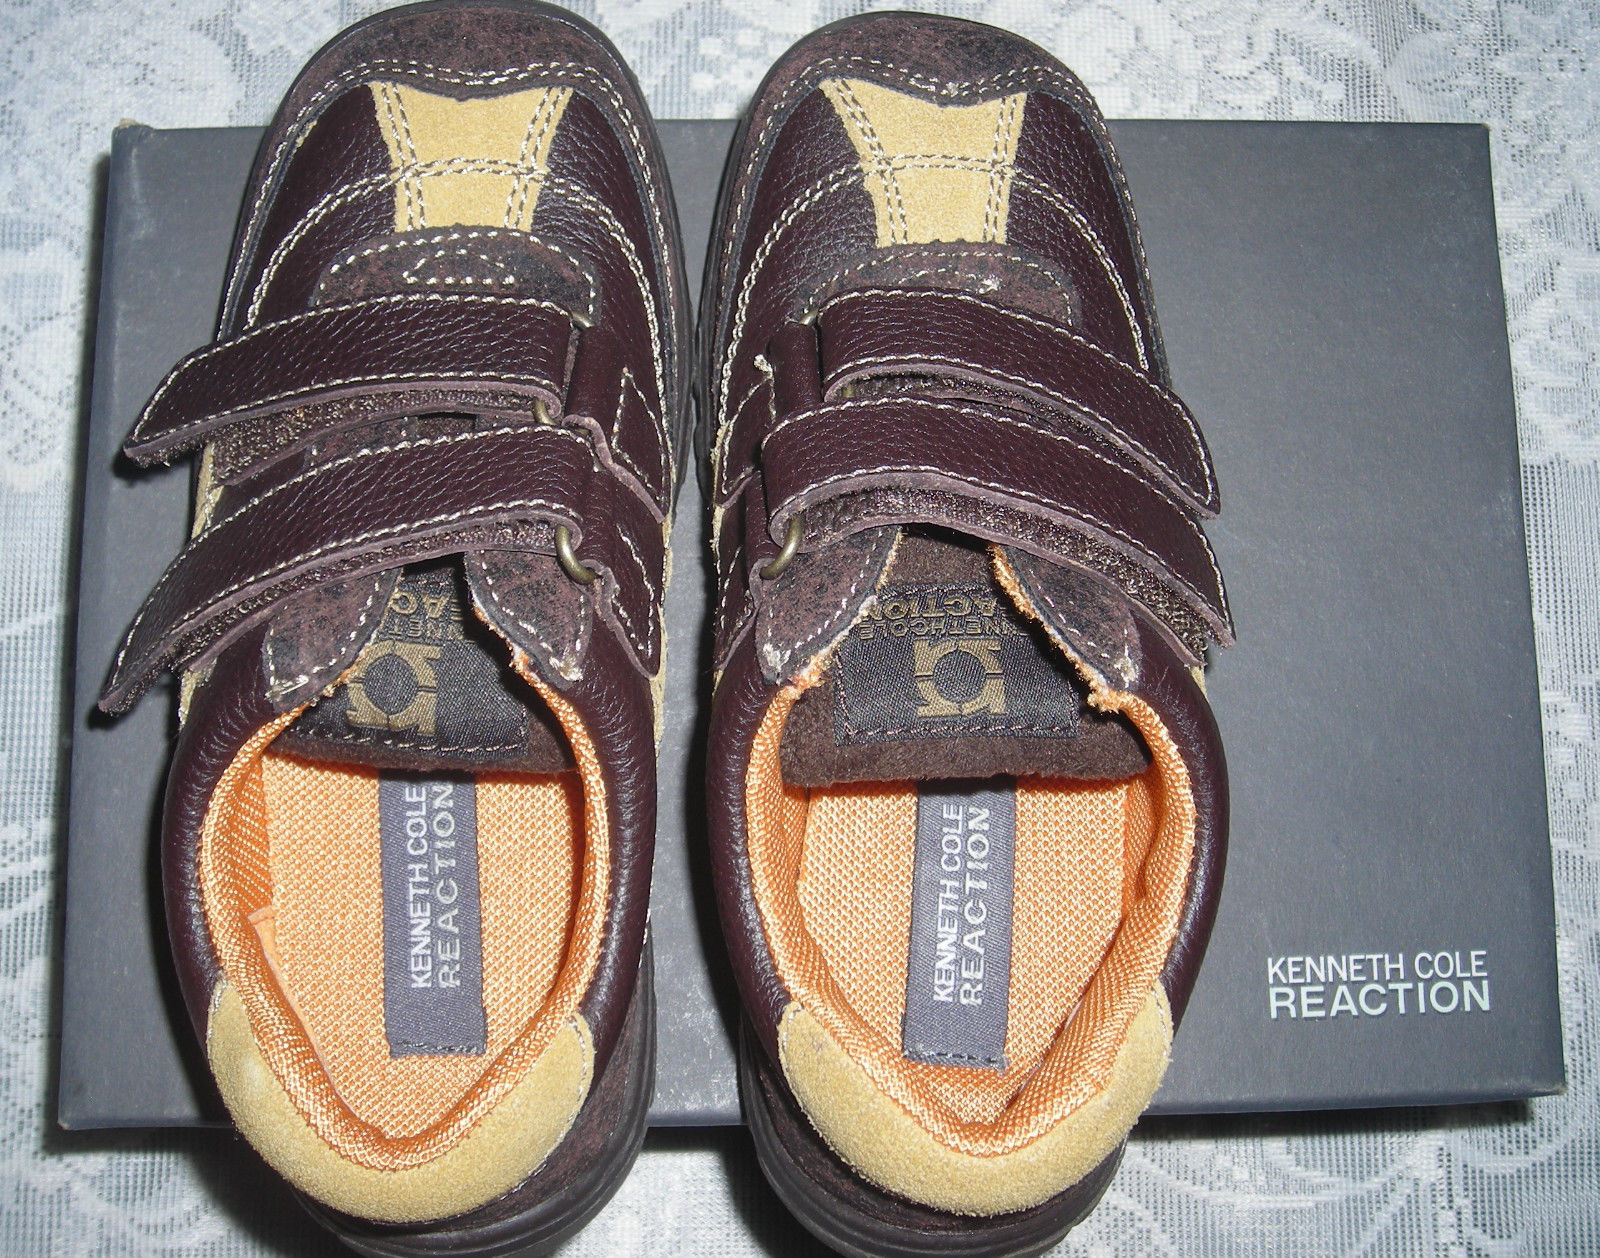 Primary image for Kenneth Cole Reaction Boys Chocolate Leather Athletic Shoes 13 M